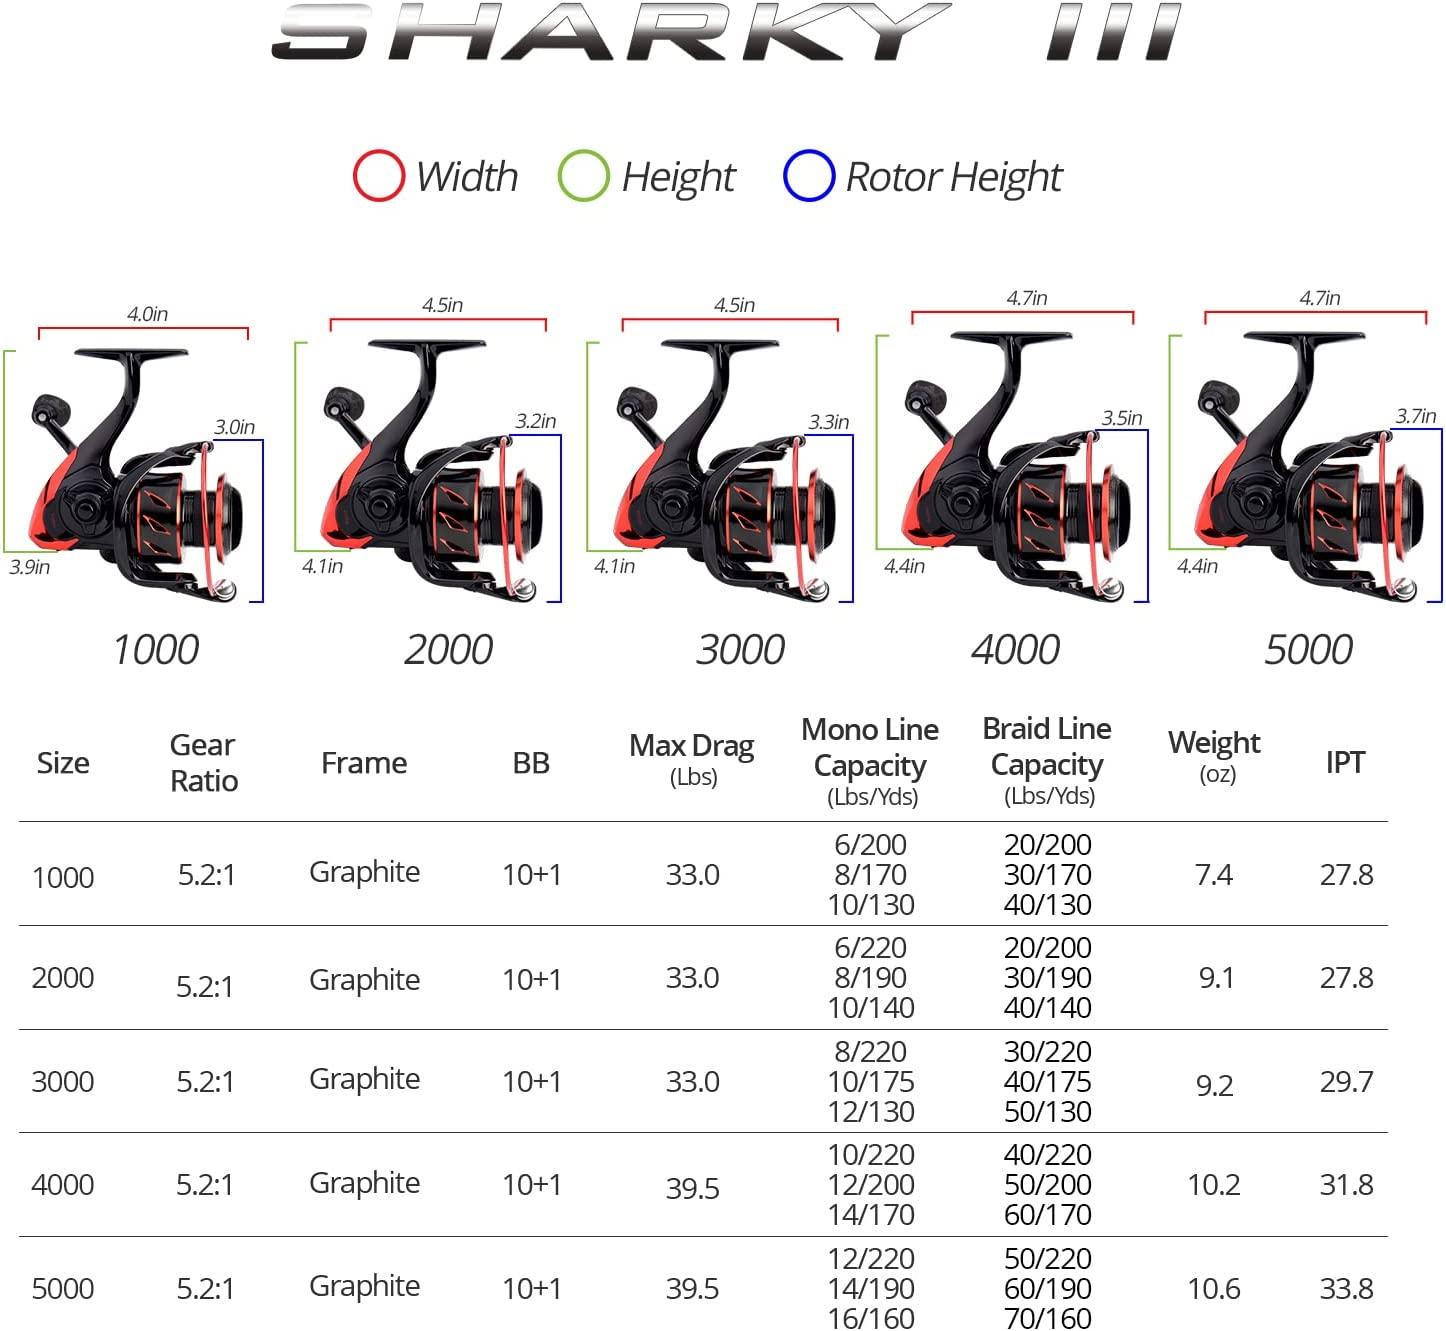 KastKing Sharky III Fishing Reel - New Spinning Reel - Carbon Fiber 39.5  LBs Max Drag - 10+1 Stainless BB for Saltwater or Freshwater - Oversize  Shaft - Super Value! 3000